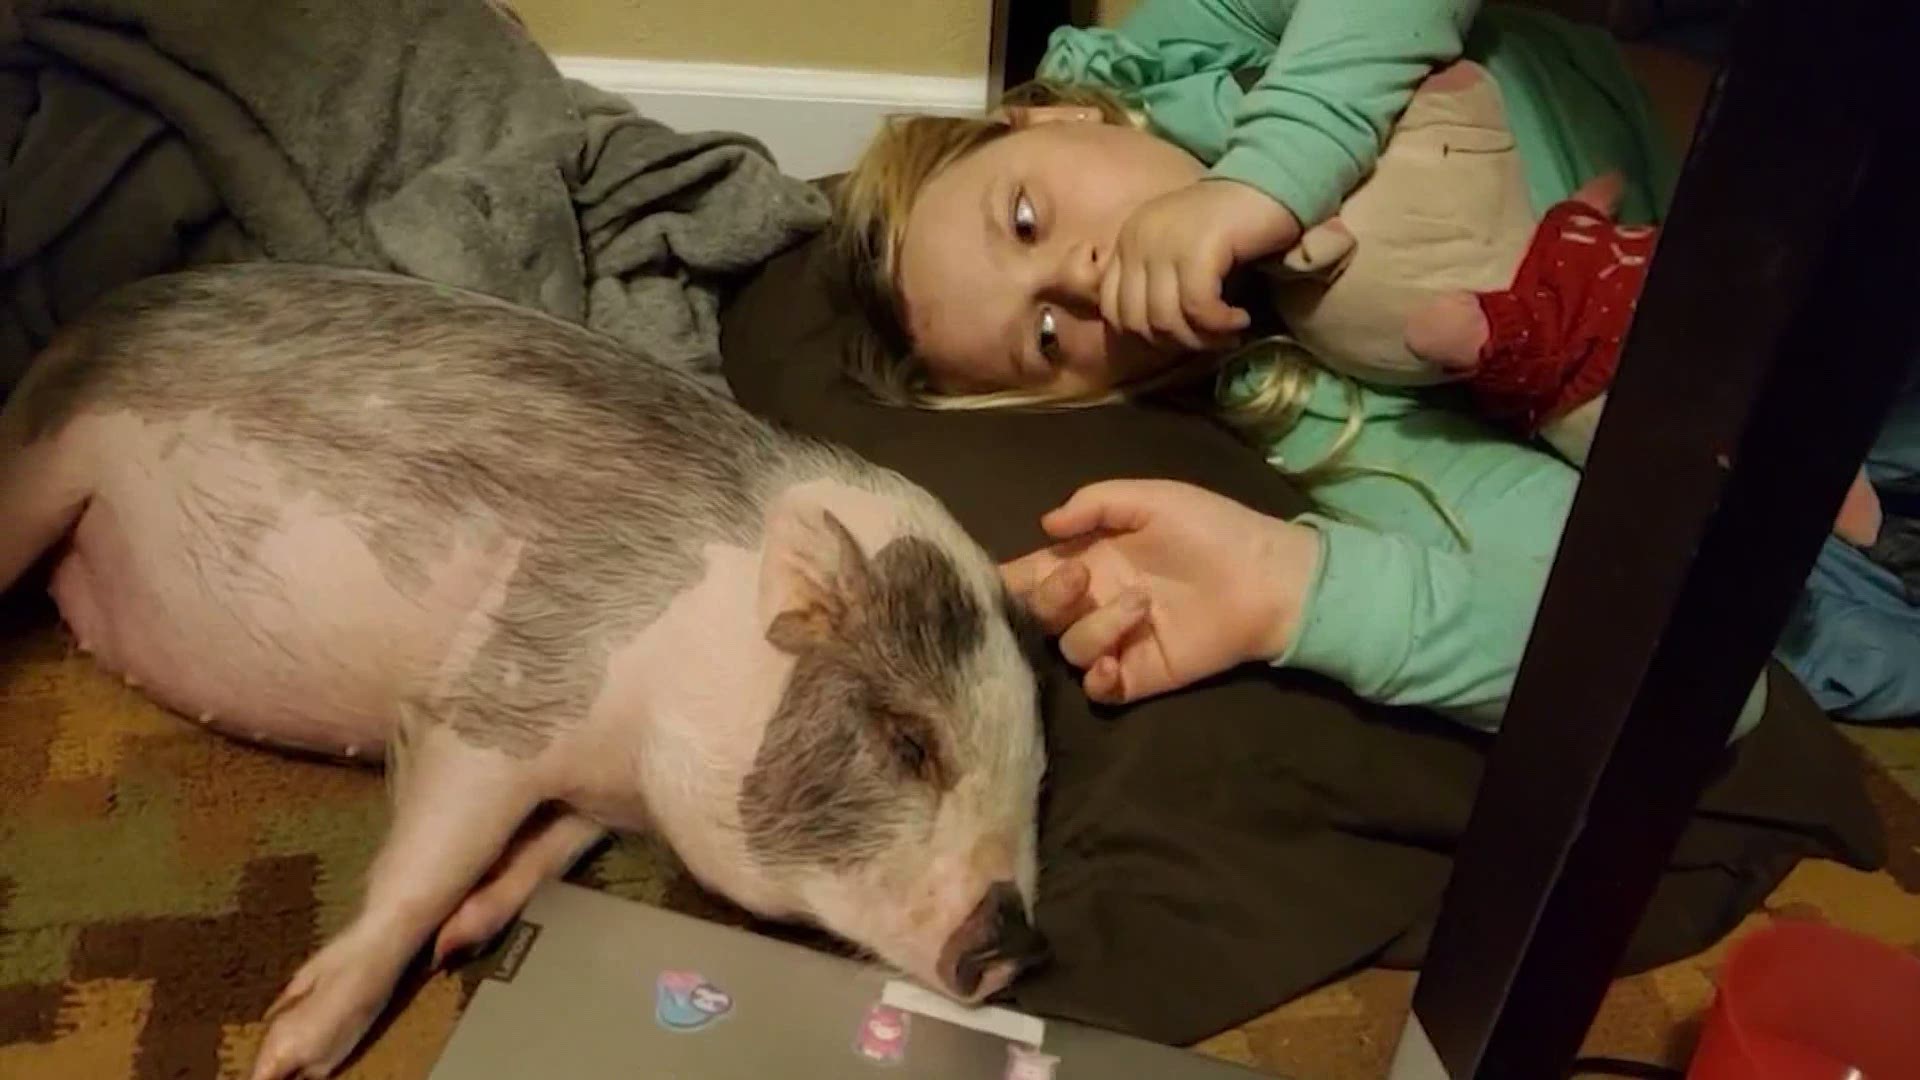 An emotional support pig stolen from a family visiting from California was still alive when a Jersey Village police officer saw her early Thursday.